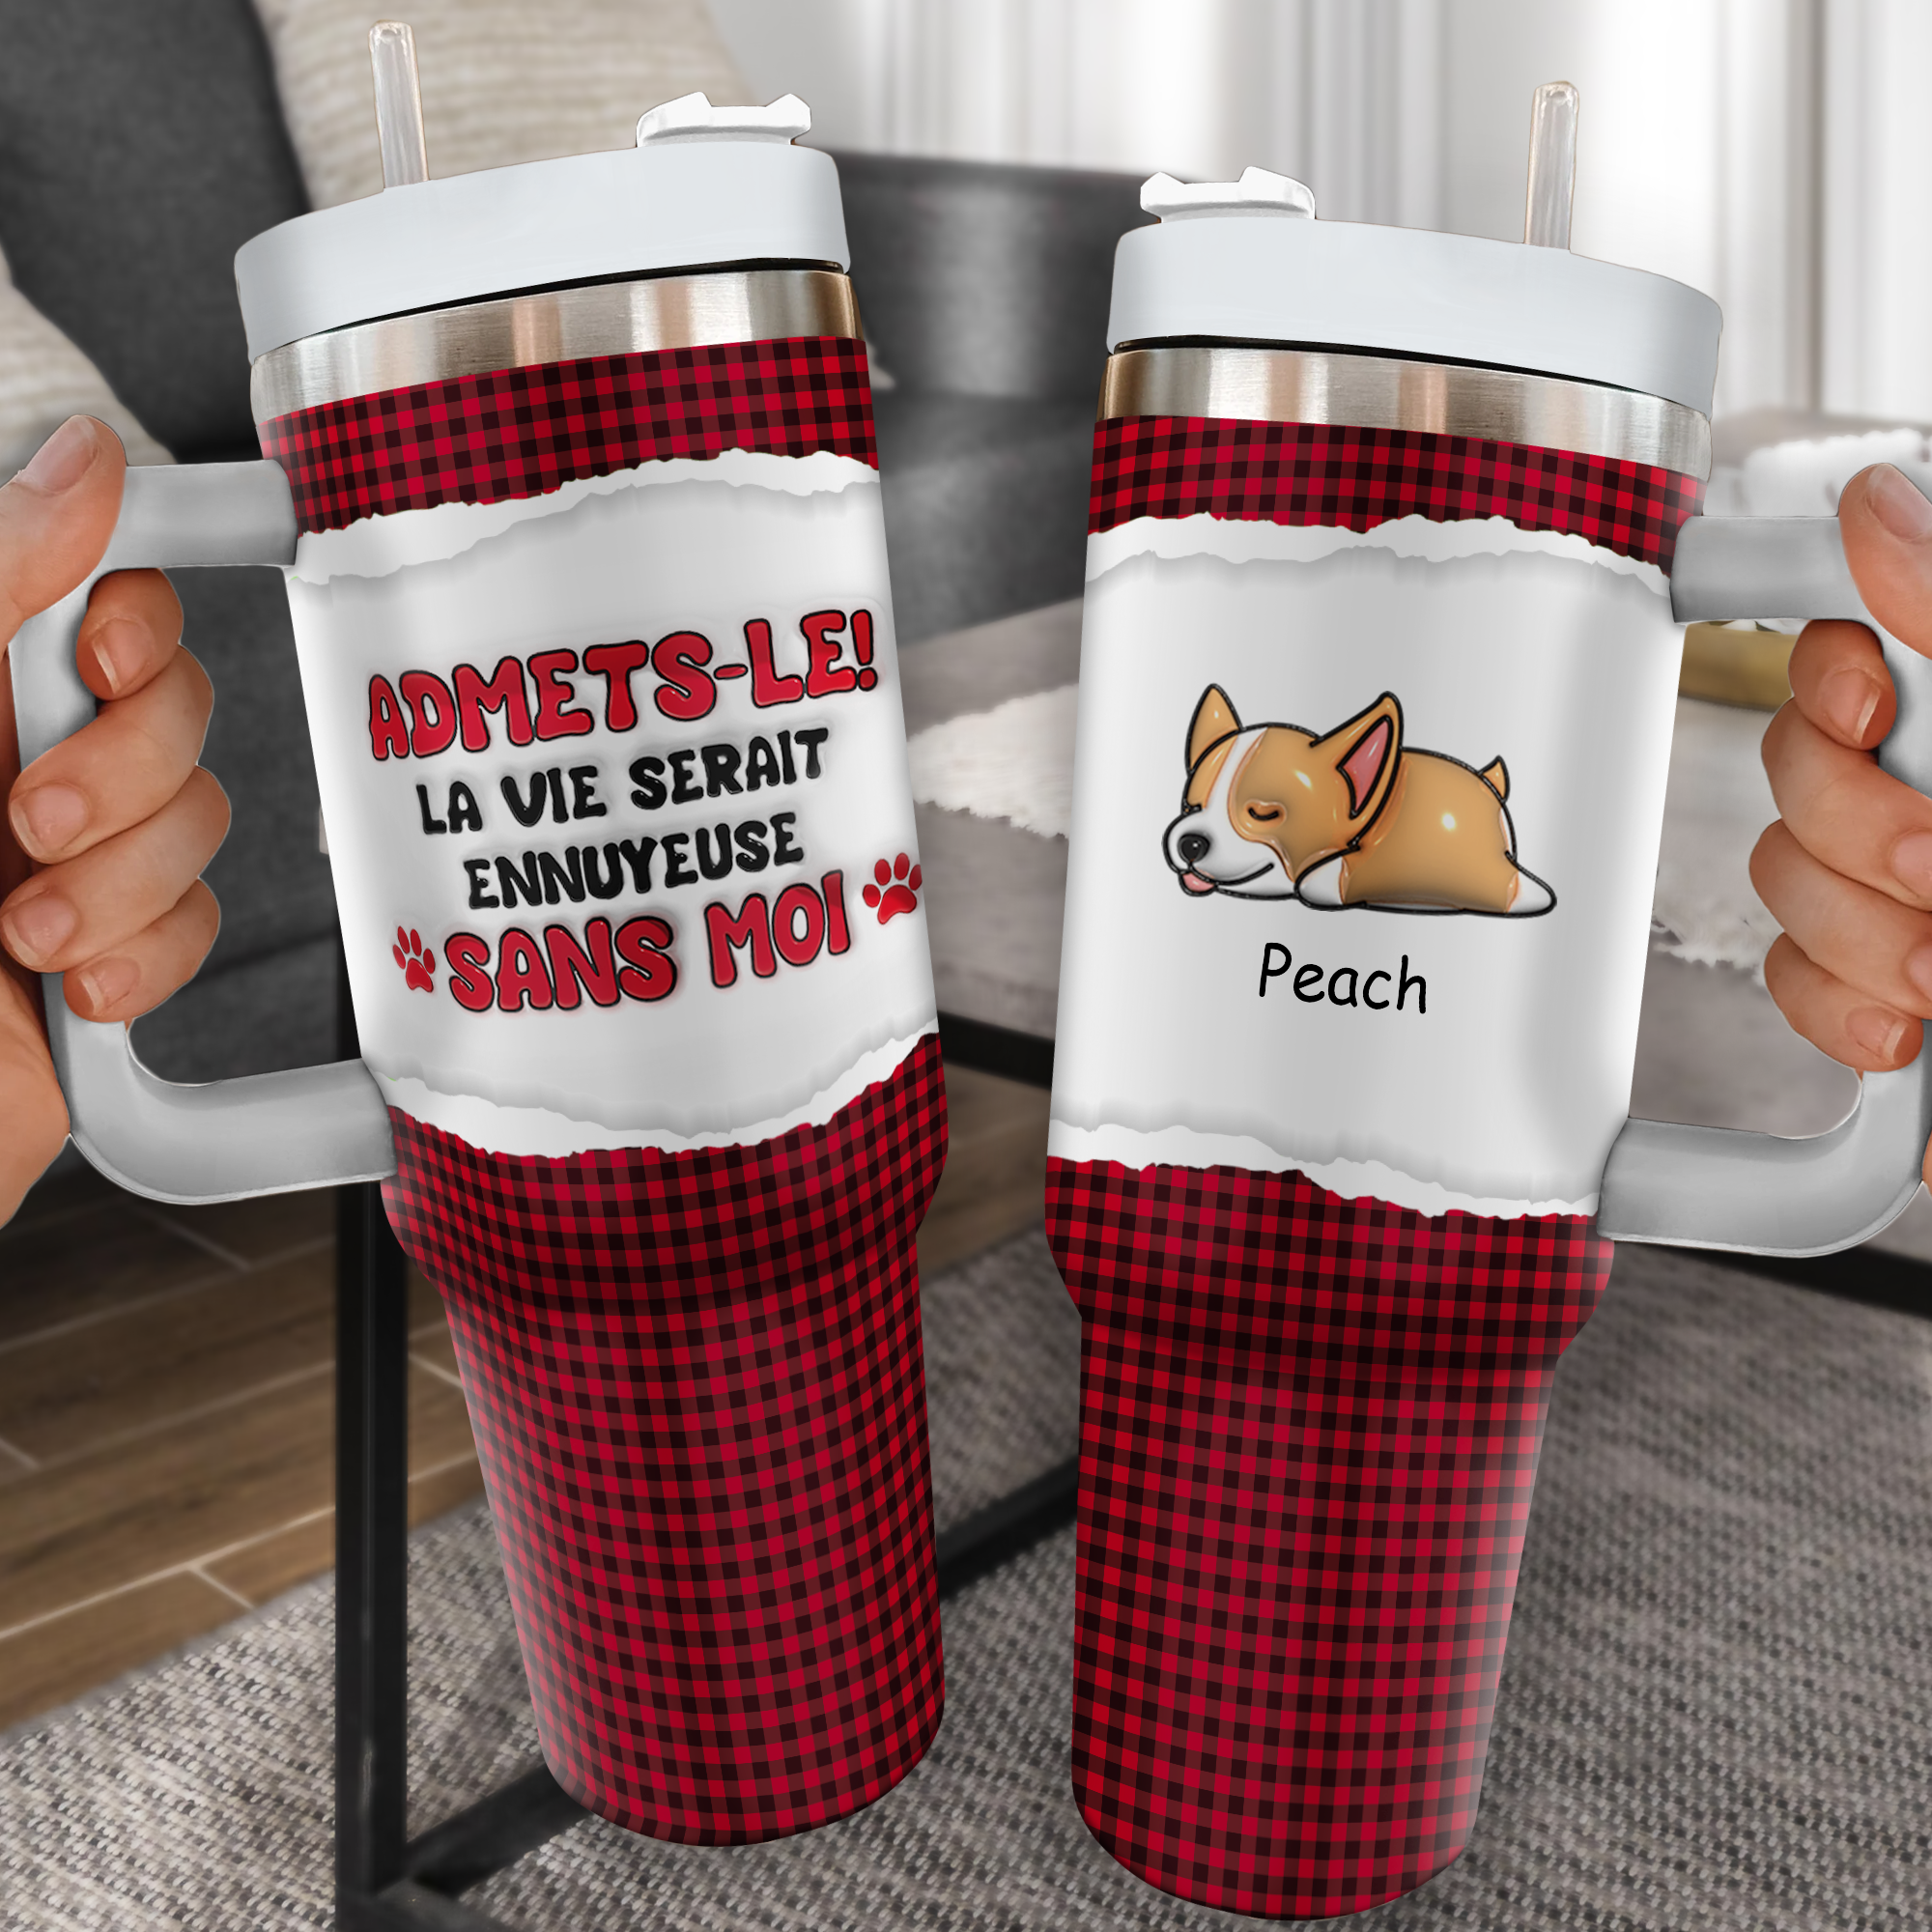 Admets-Le - Gift For Mom, Gift For Friends, Gift For Her - Personalized Custom Tumbler